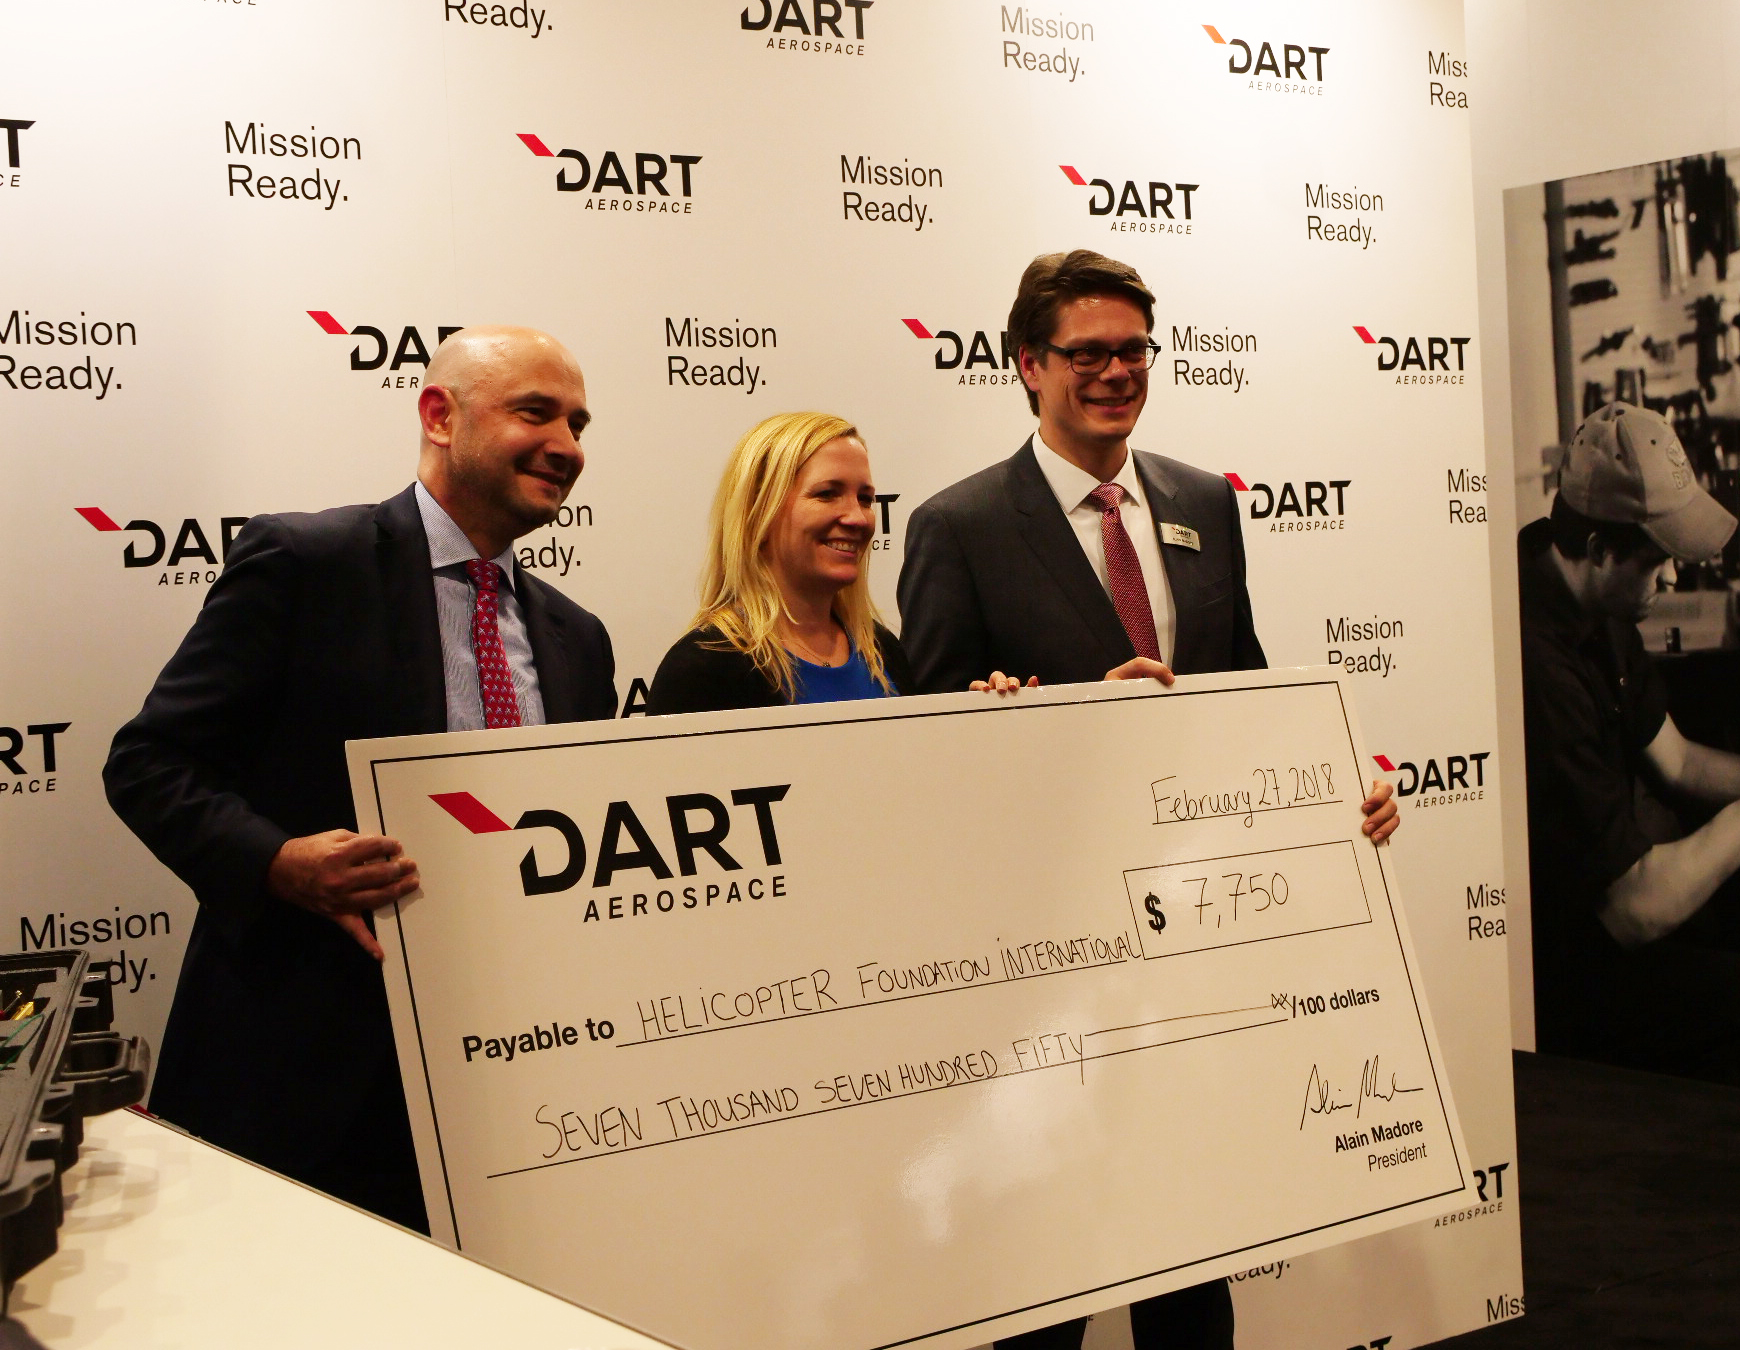 DART raised $7,750 for the Helicopter Foundation International during its annual cocktail event at Heli-Expo 2018. DART Aerospace Photo